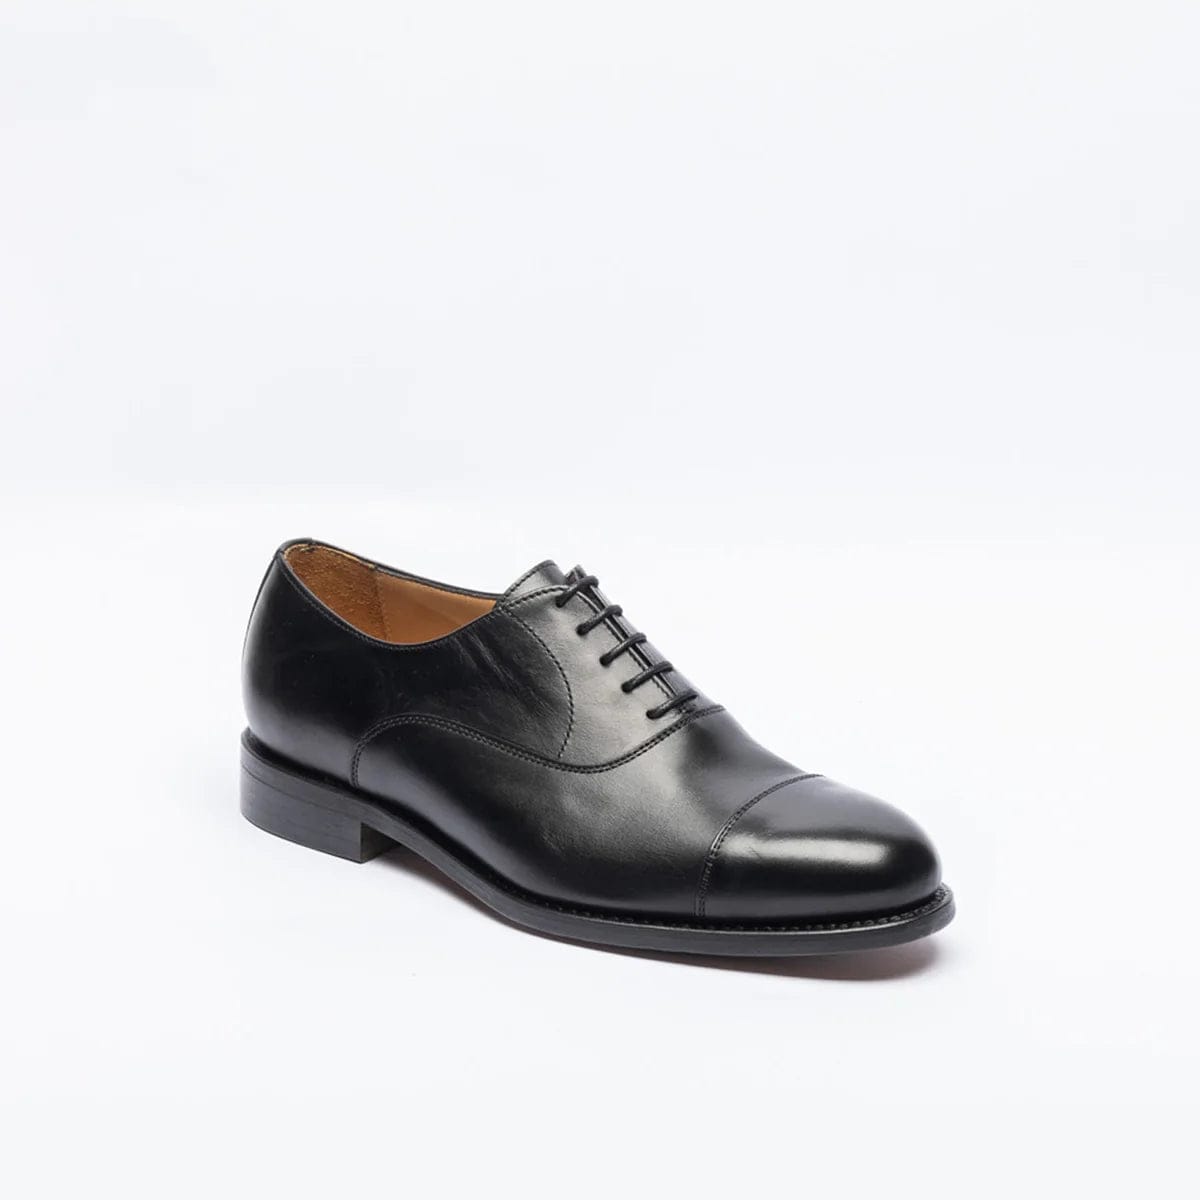 1707 Oxfords 4490 Chateaubriand Black Leather Sole